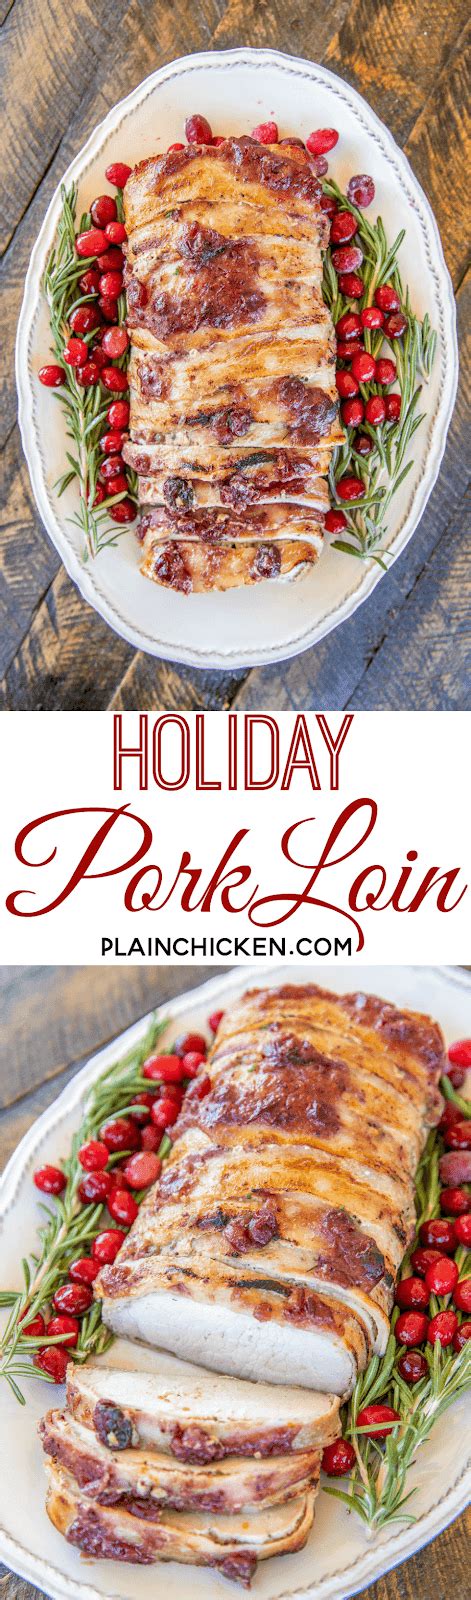 By the time you go to eat this roast pork, it should be tender and packed with some incredible flavors thanks to the seasoning mixture. Slow Cooker Cranberry Orange Pork Loin | Plain Chicken®